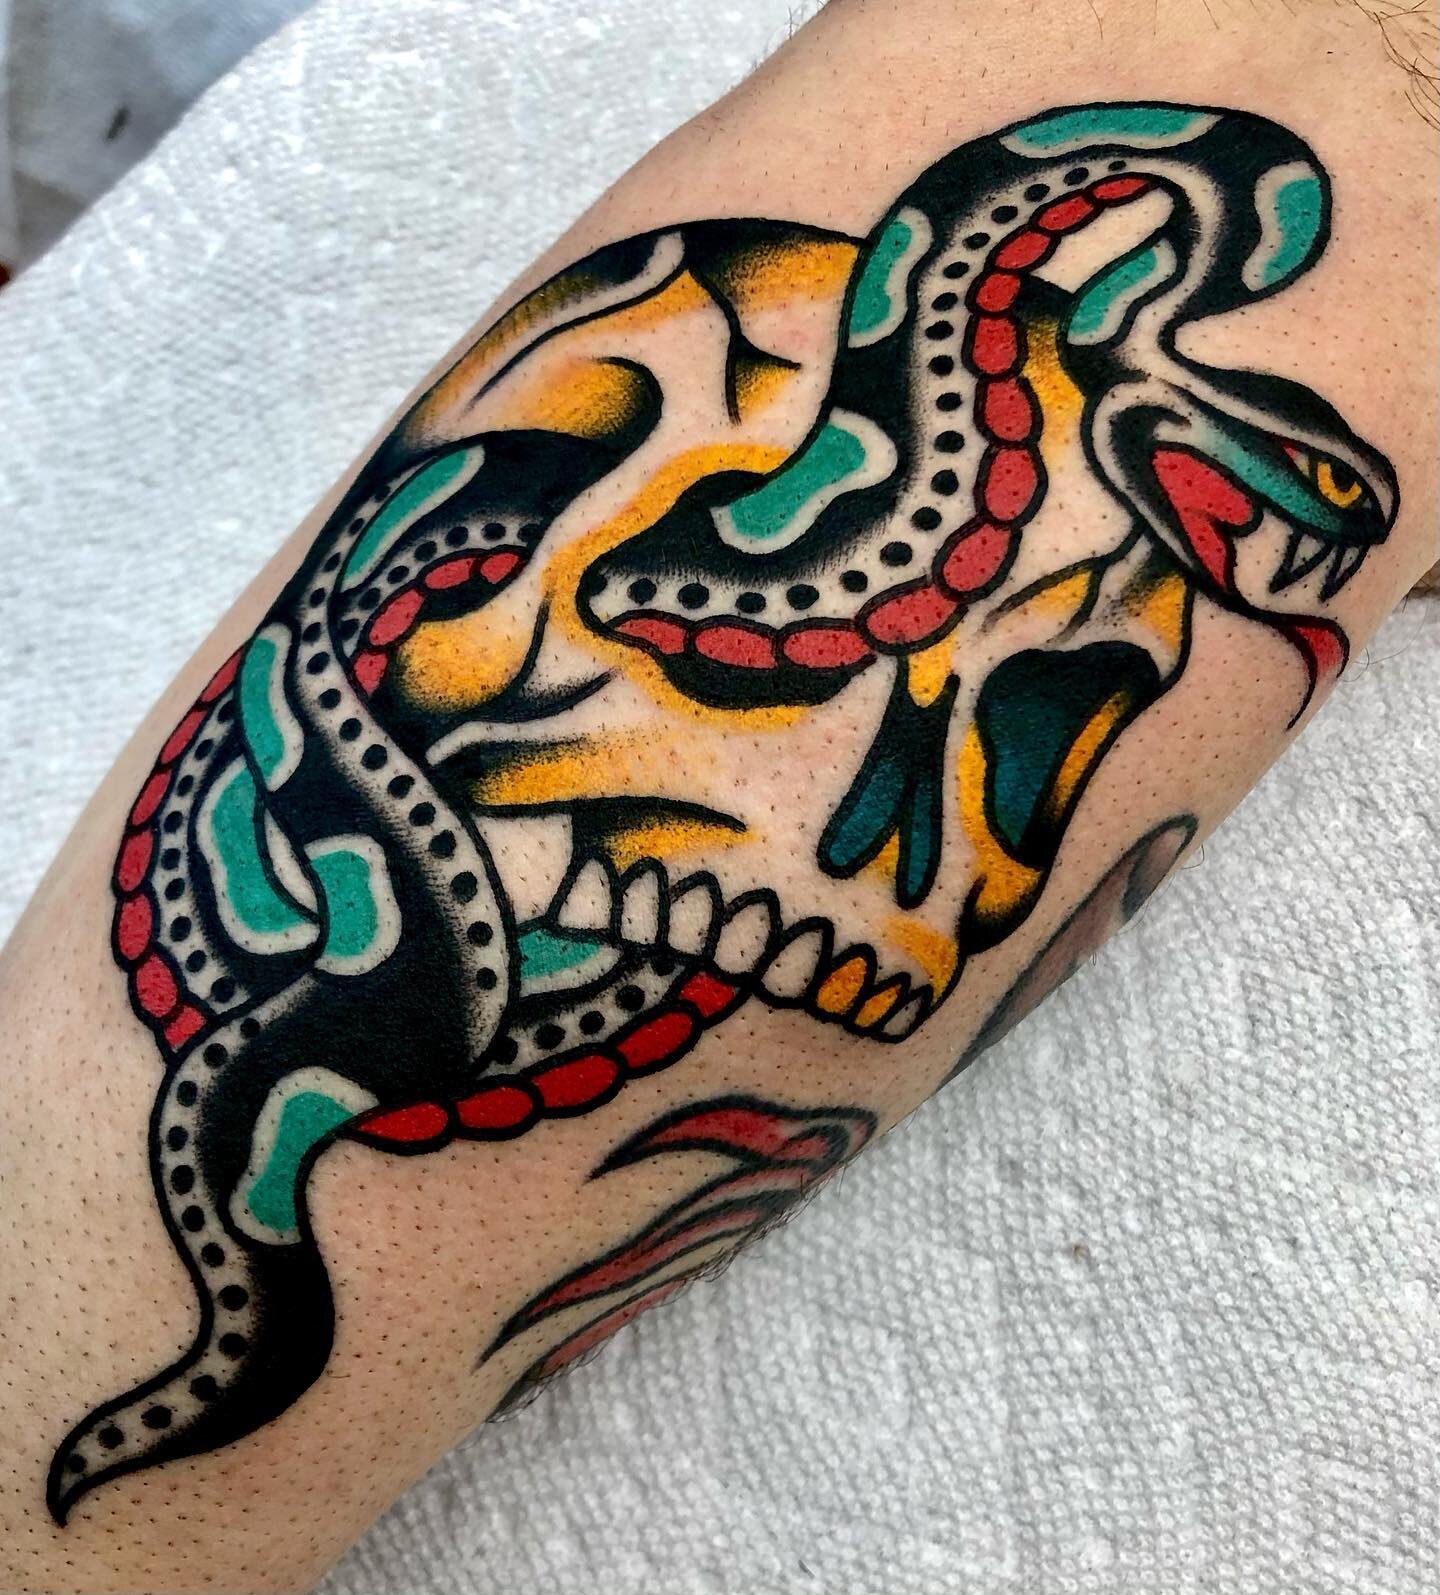 Skull and snake from last week! Took a couple cool pieces off of our wall and combined them. Thanks for looking! #tattoo #tattoos #traditionaltattoos #bright_and_bold #skinart #oldlines #oldschooltattoo #traditionalclub #tattooing #tattooart #tradwor